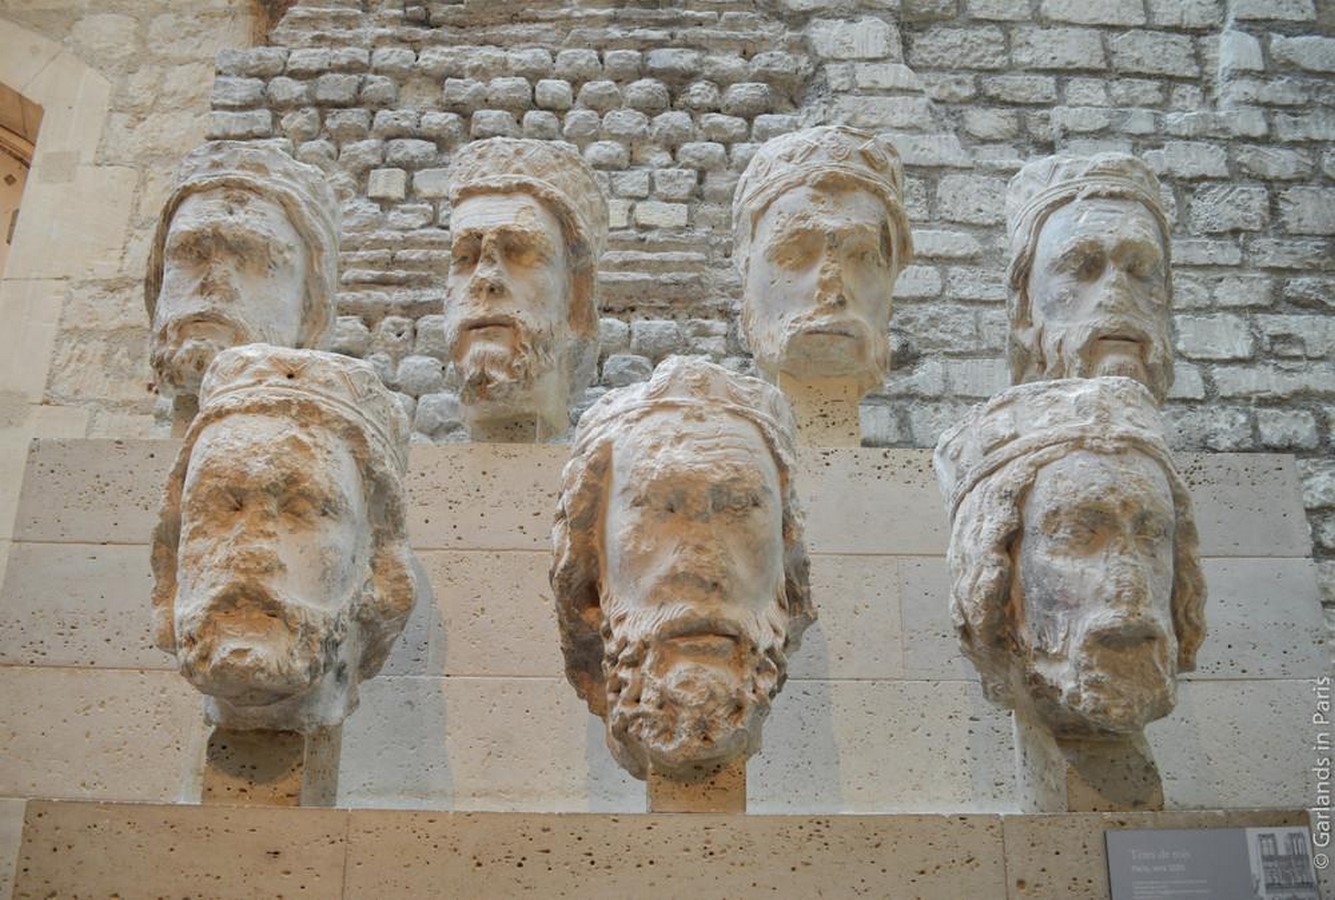 Decapitated Heads of the Kings of Judah_©httpswww.marinagrosshoy.comblogthe-severed-heads-of-notre-dame